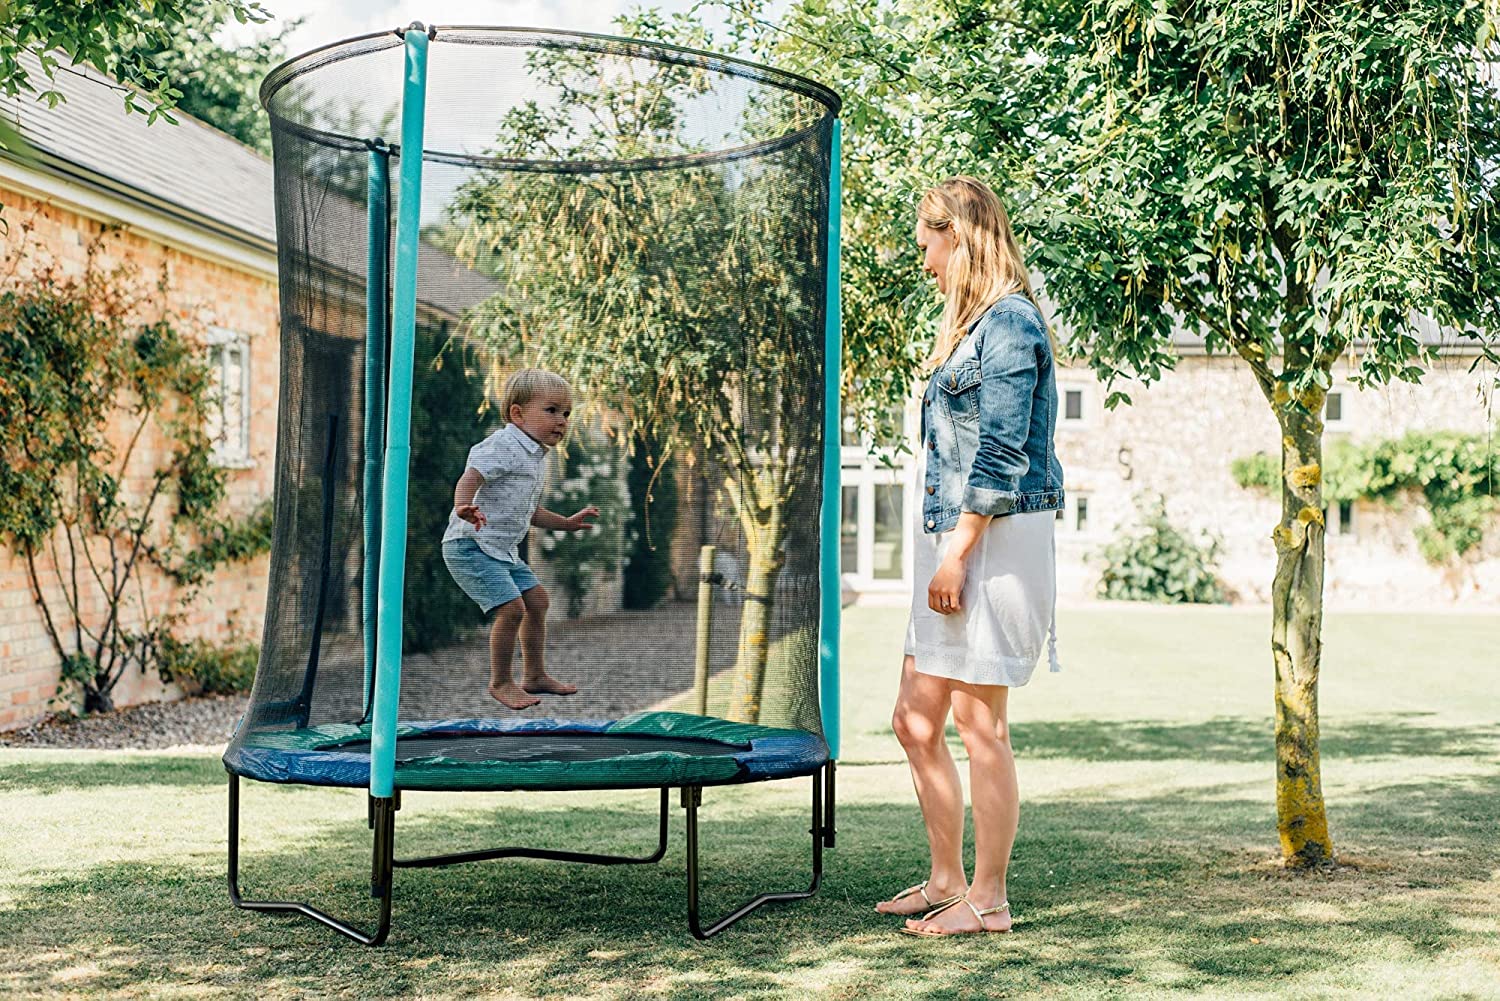 Plum 4.5ft Junior Trampoline and Enclosure with Safety Net - Indoor & Outdoor Trampoline for Ages 3-6 Years